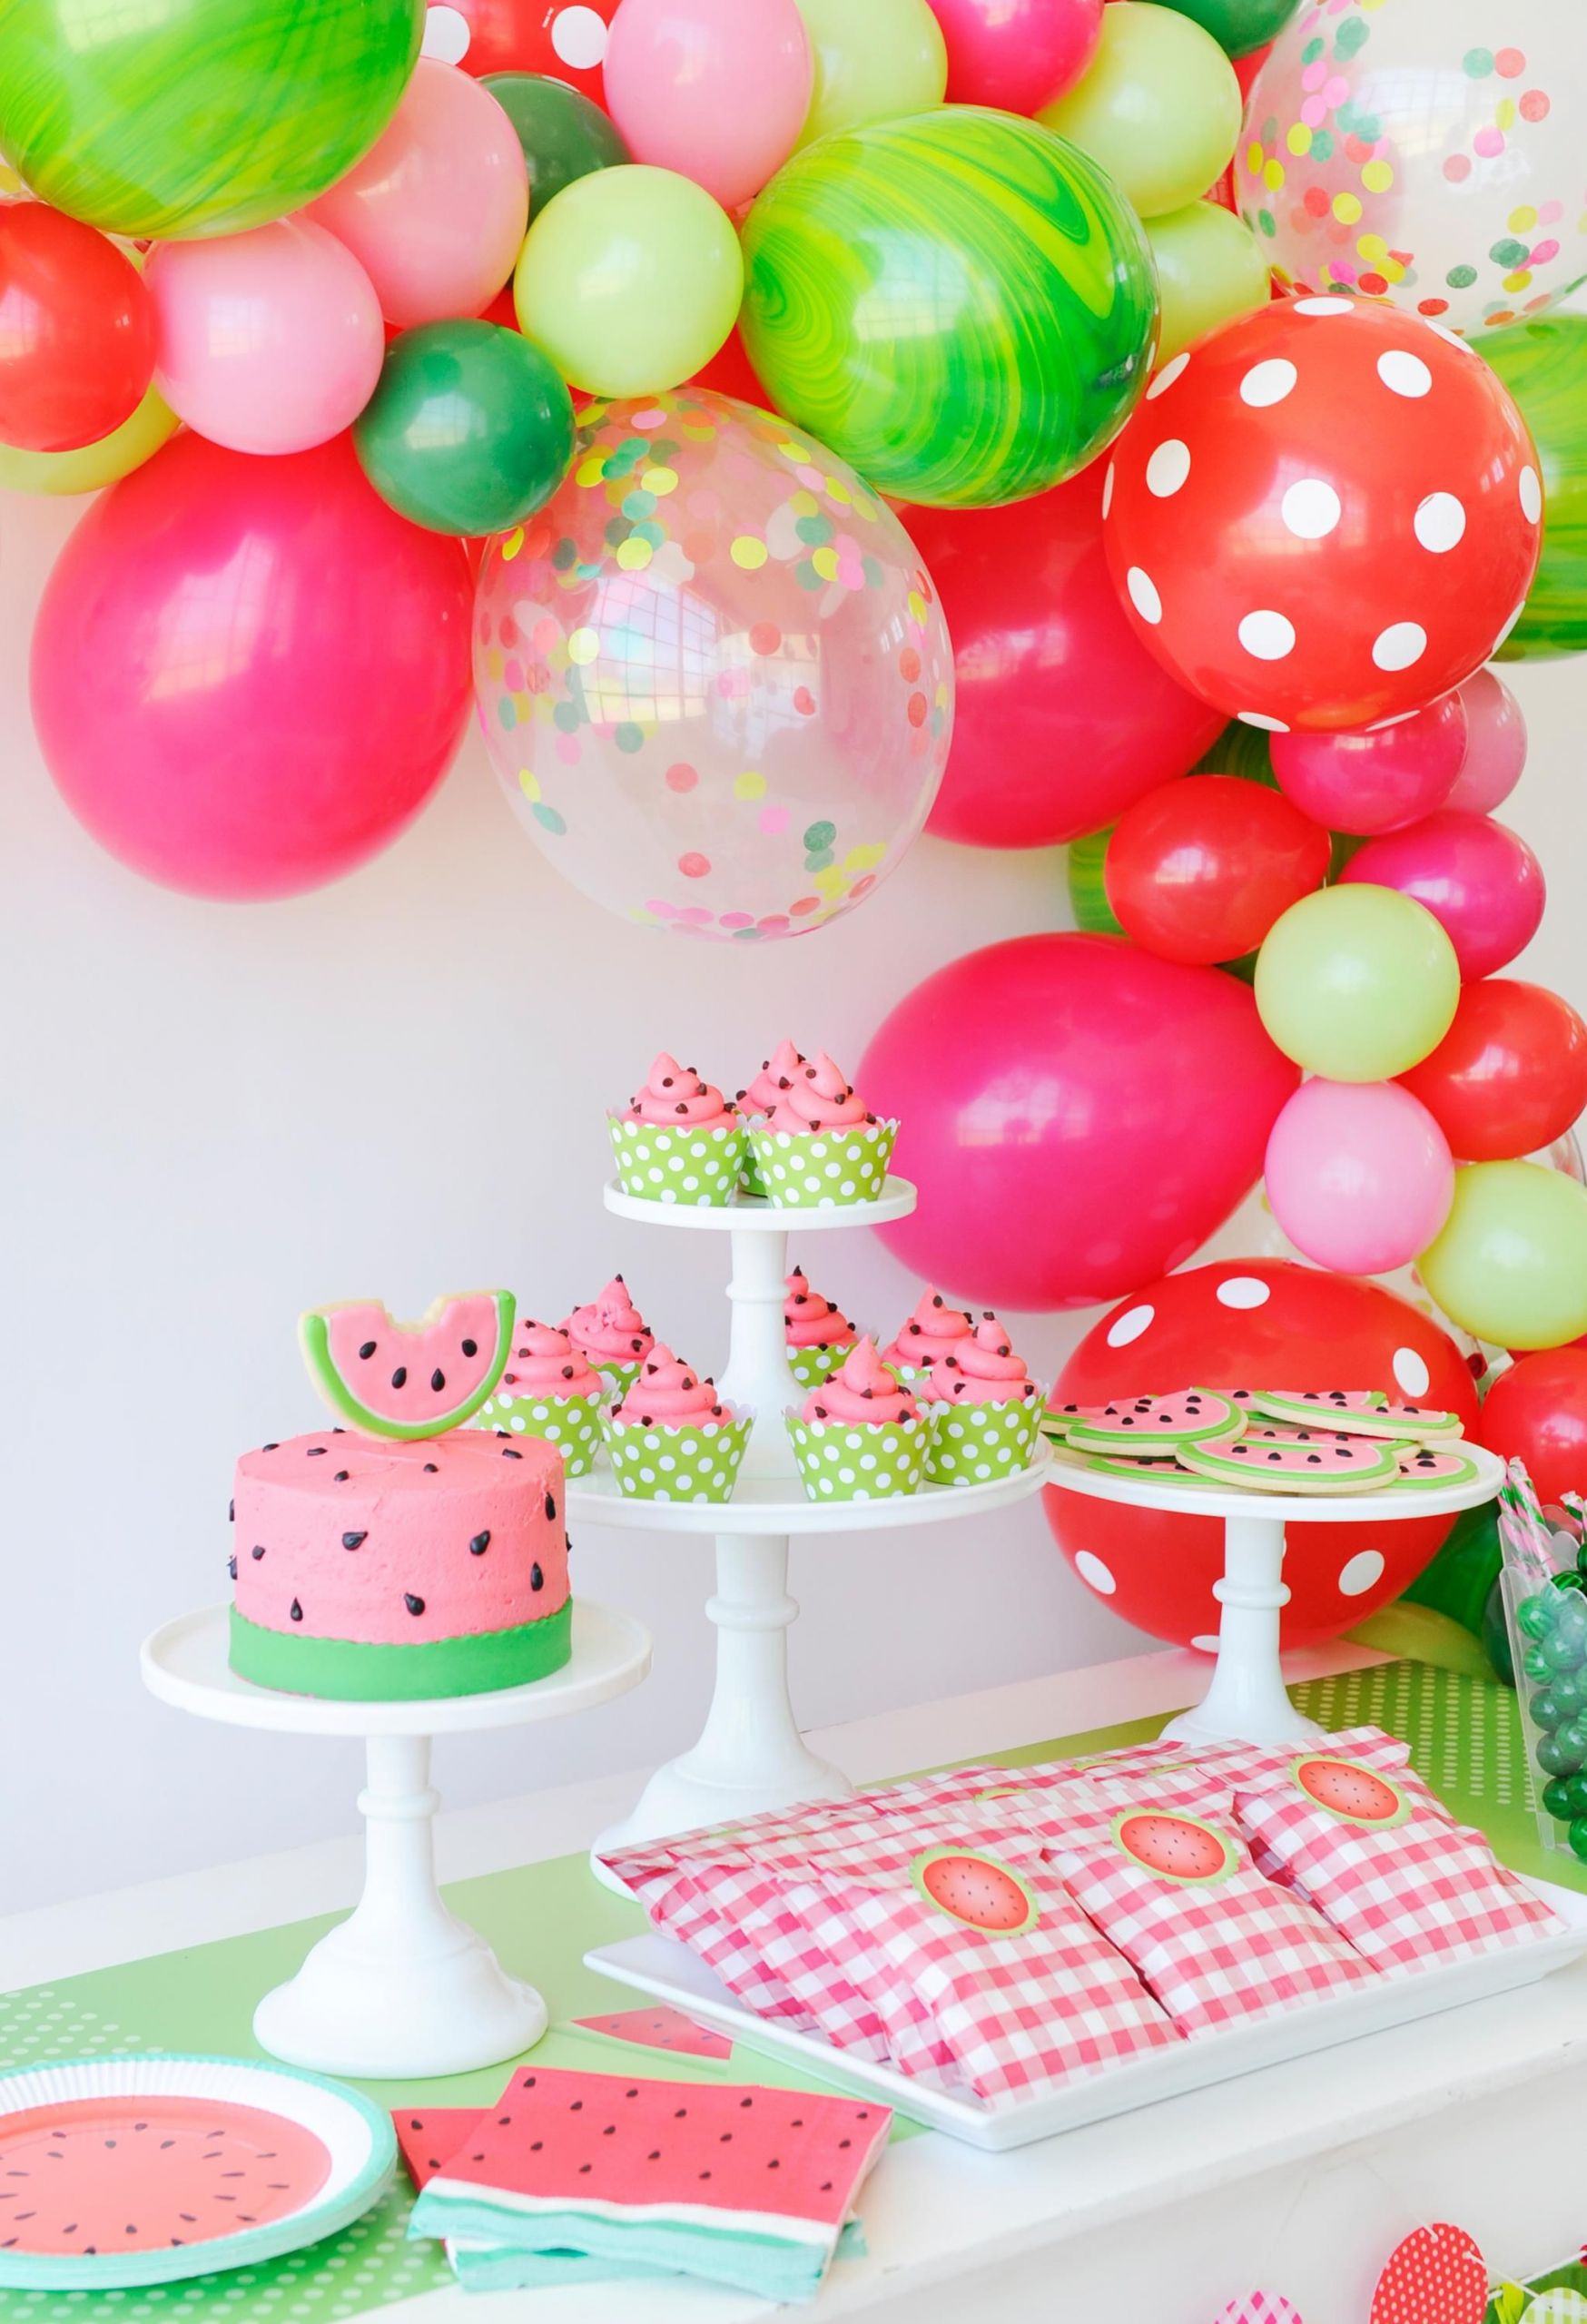 Summer Birthday Party Ideas For Girls
 This Watermelon Party is Juicy & Delicious Project